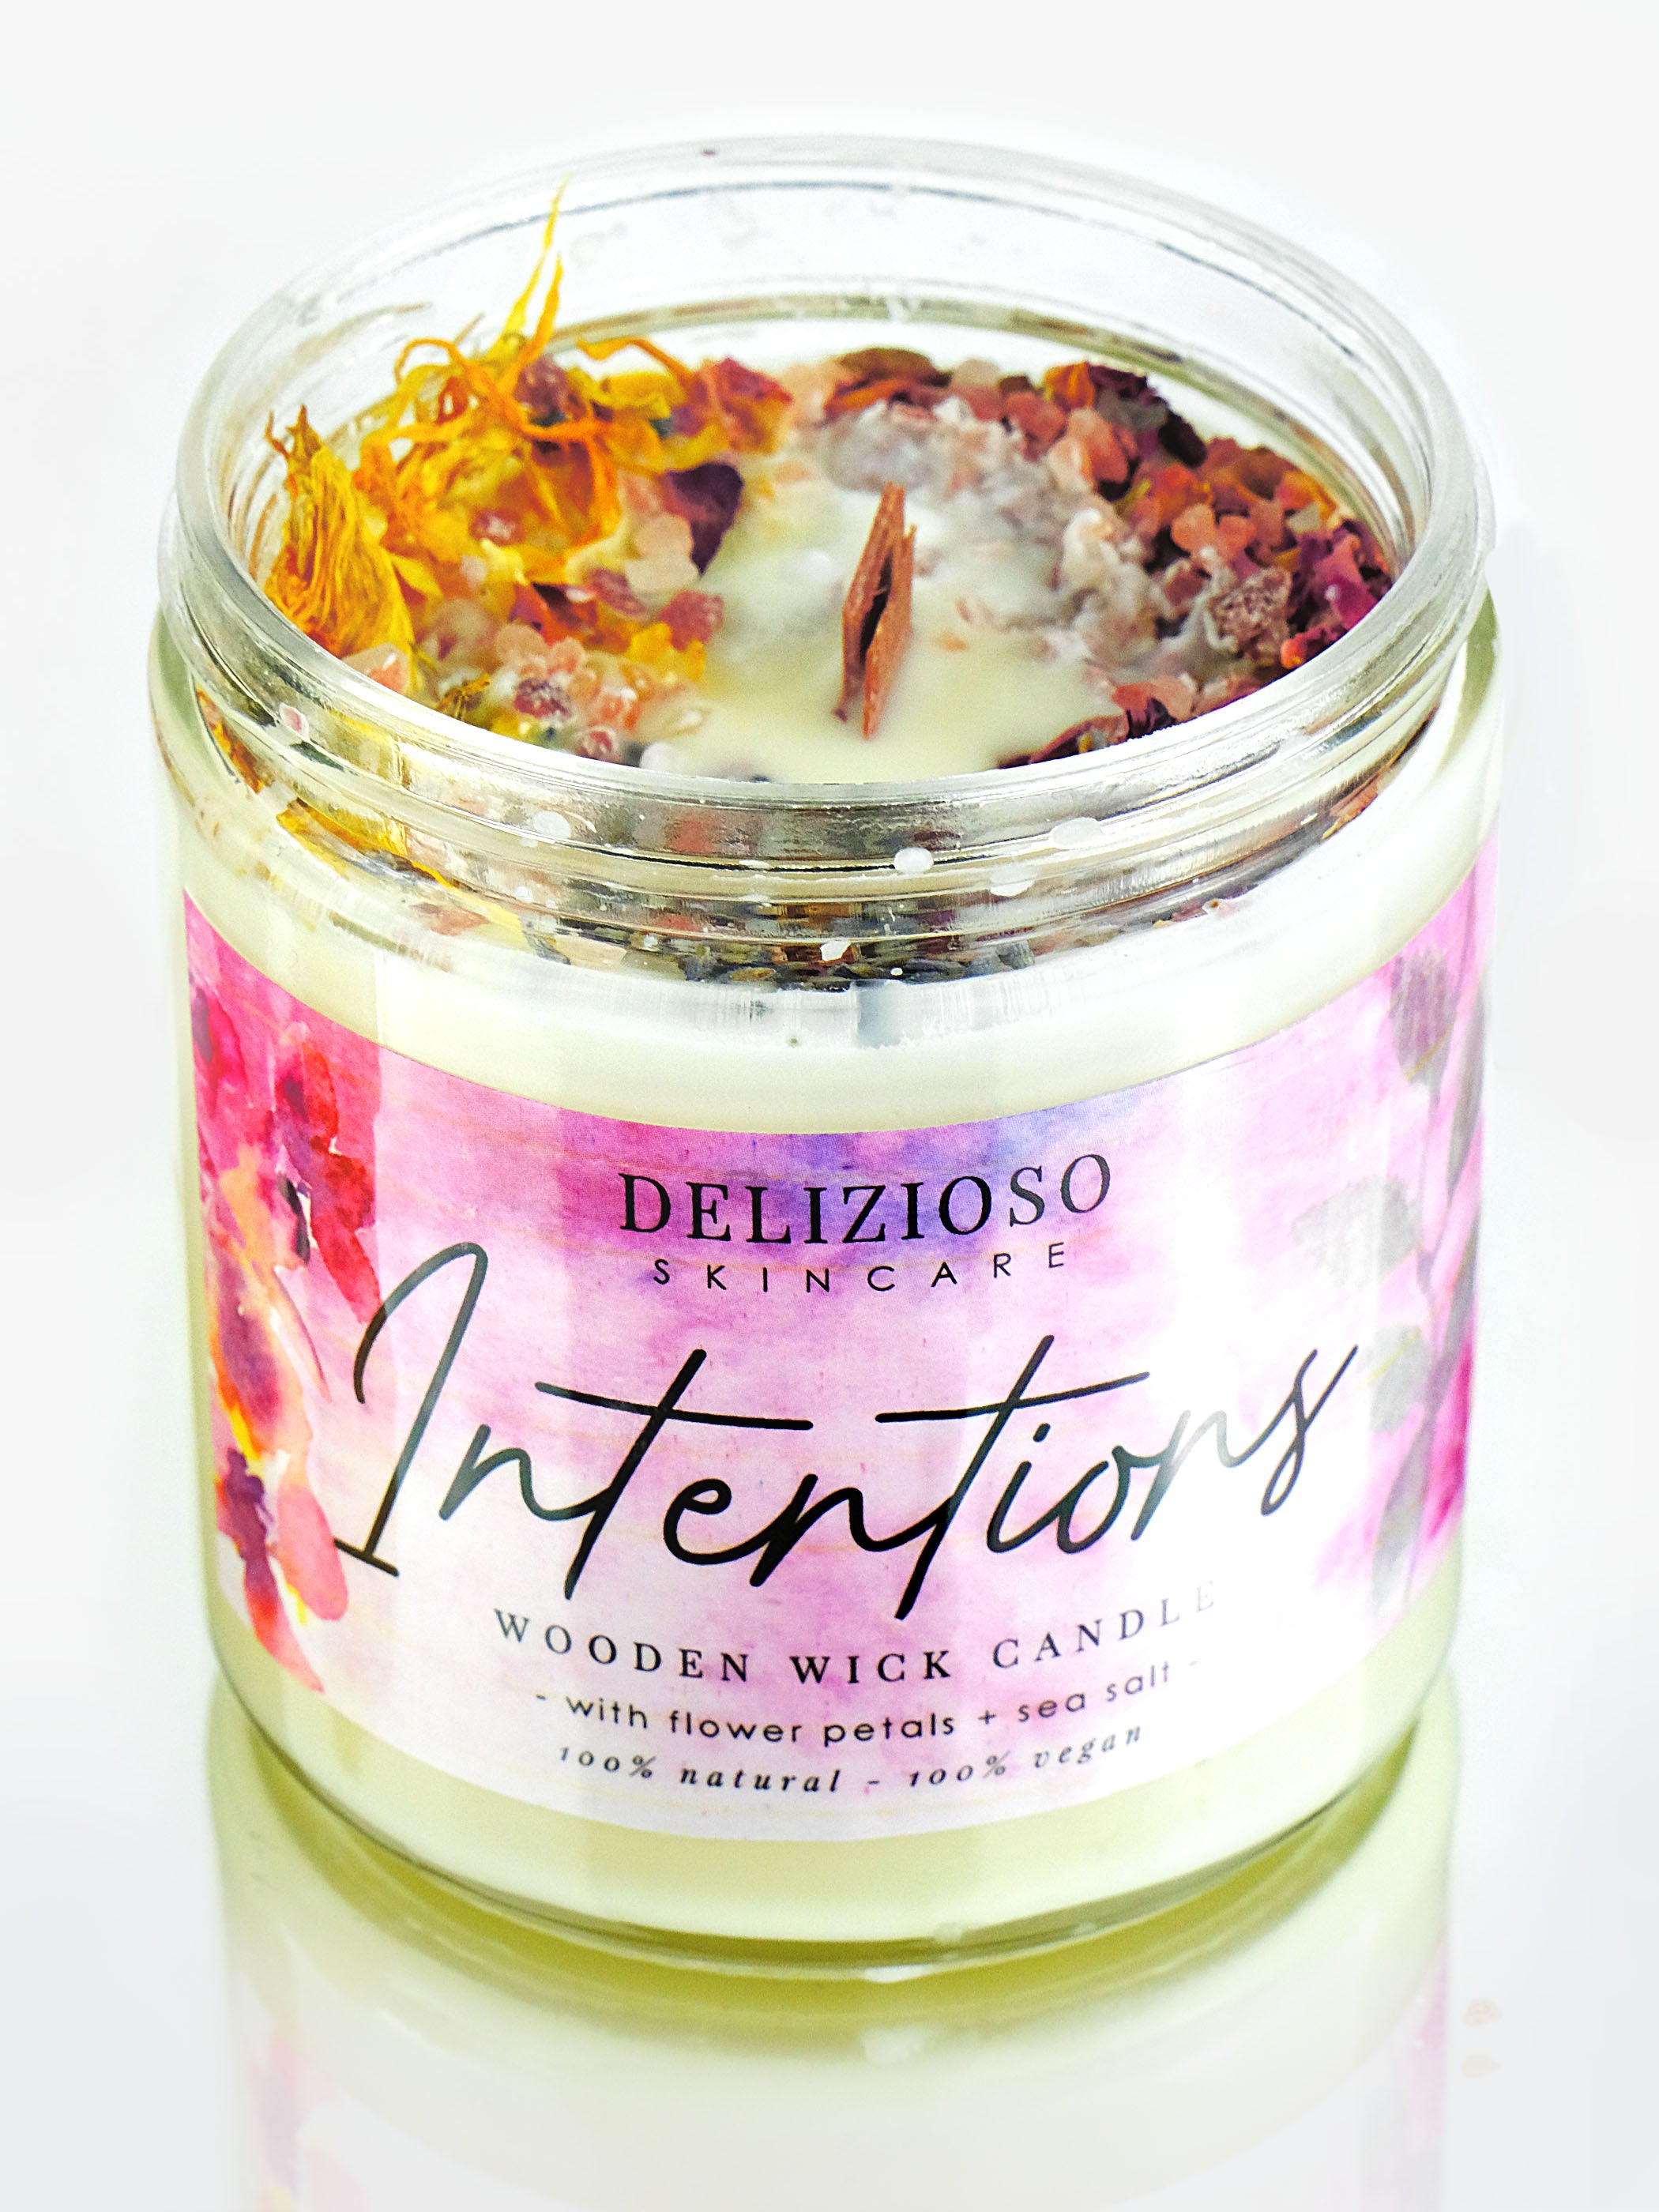 Intention Wooden Wick Soy Lotion Candle